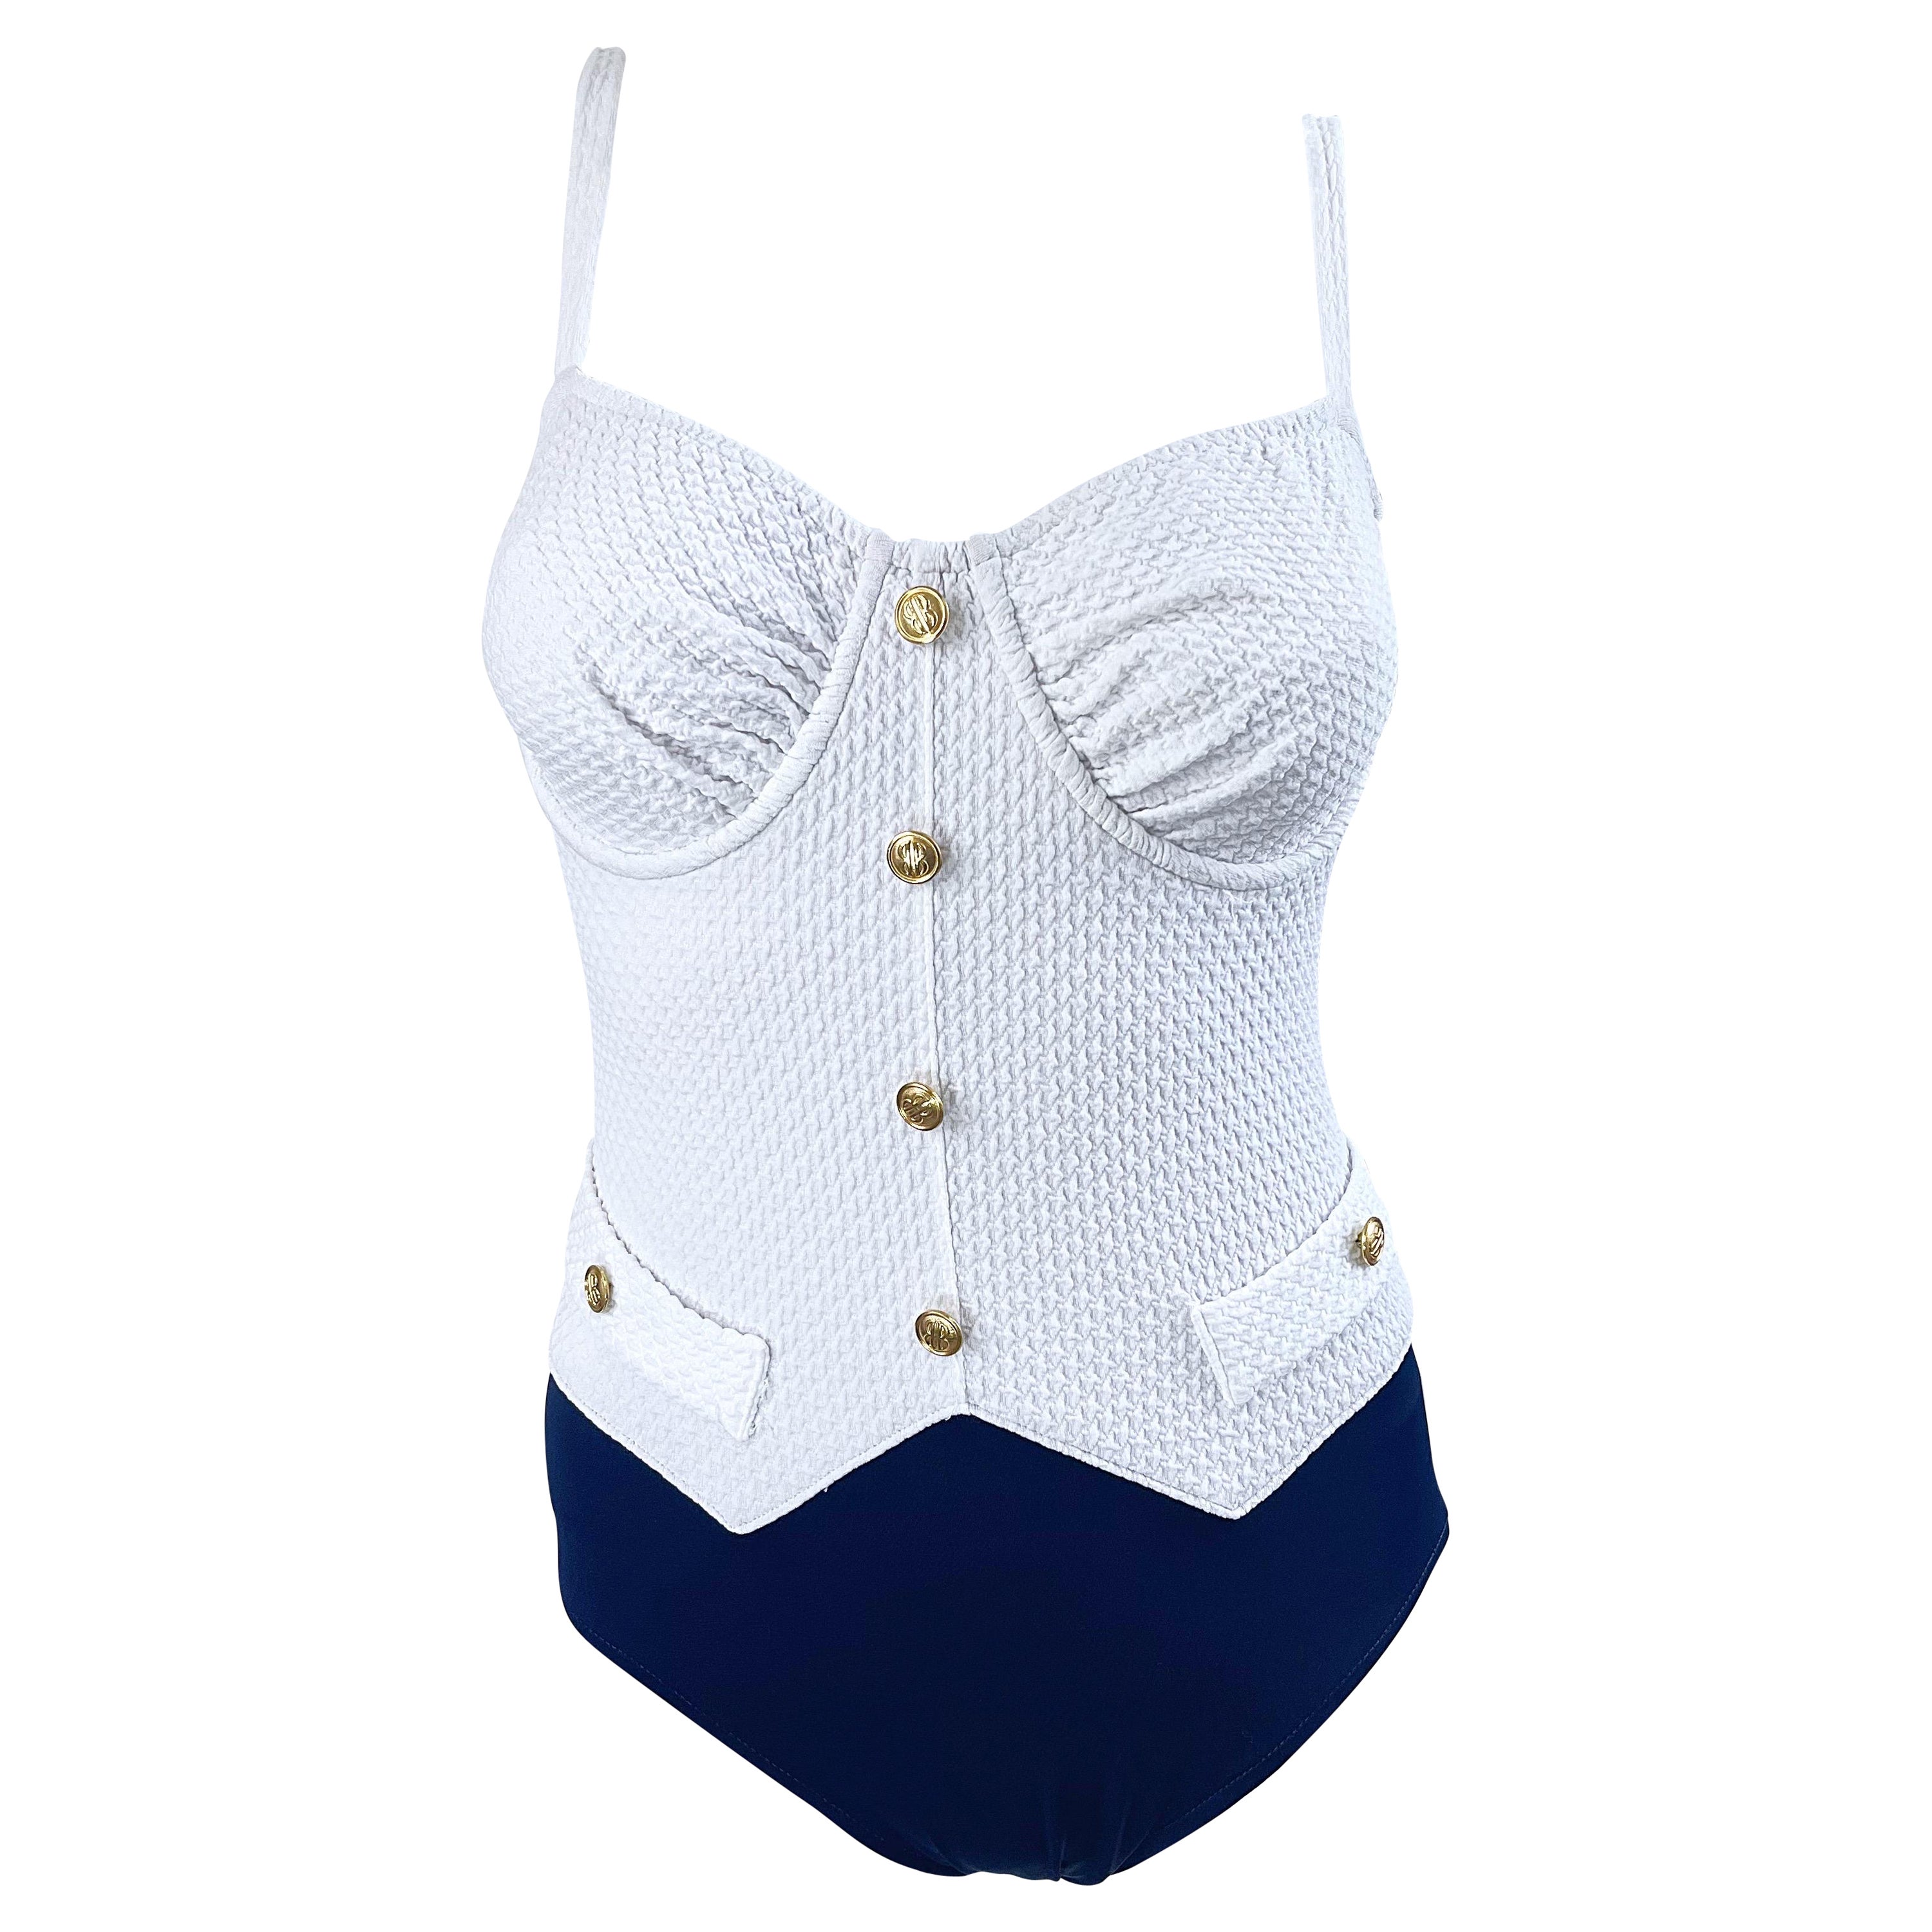 1980s Bill Blass Navy Blue and White Vintage 80s One Piece Swimsuit Bodysuit For Sale